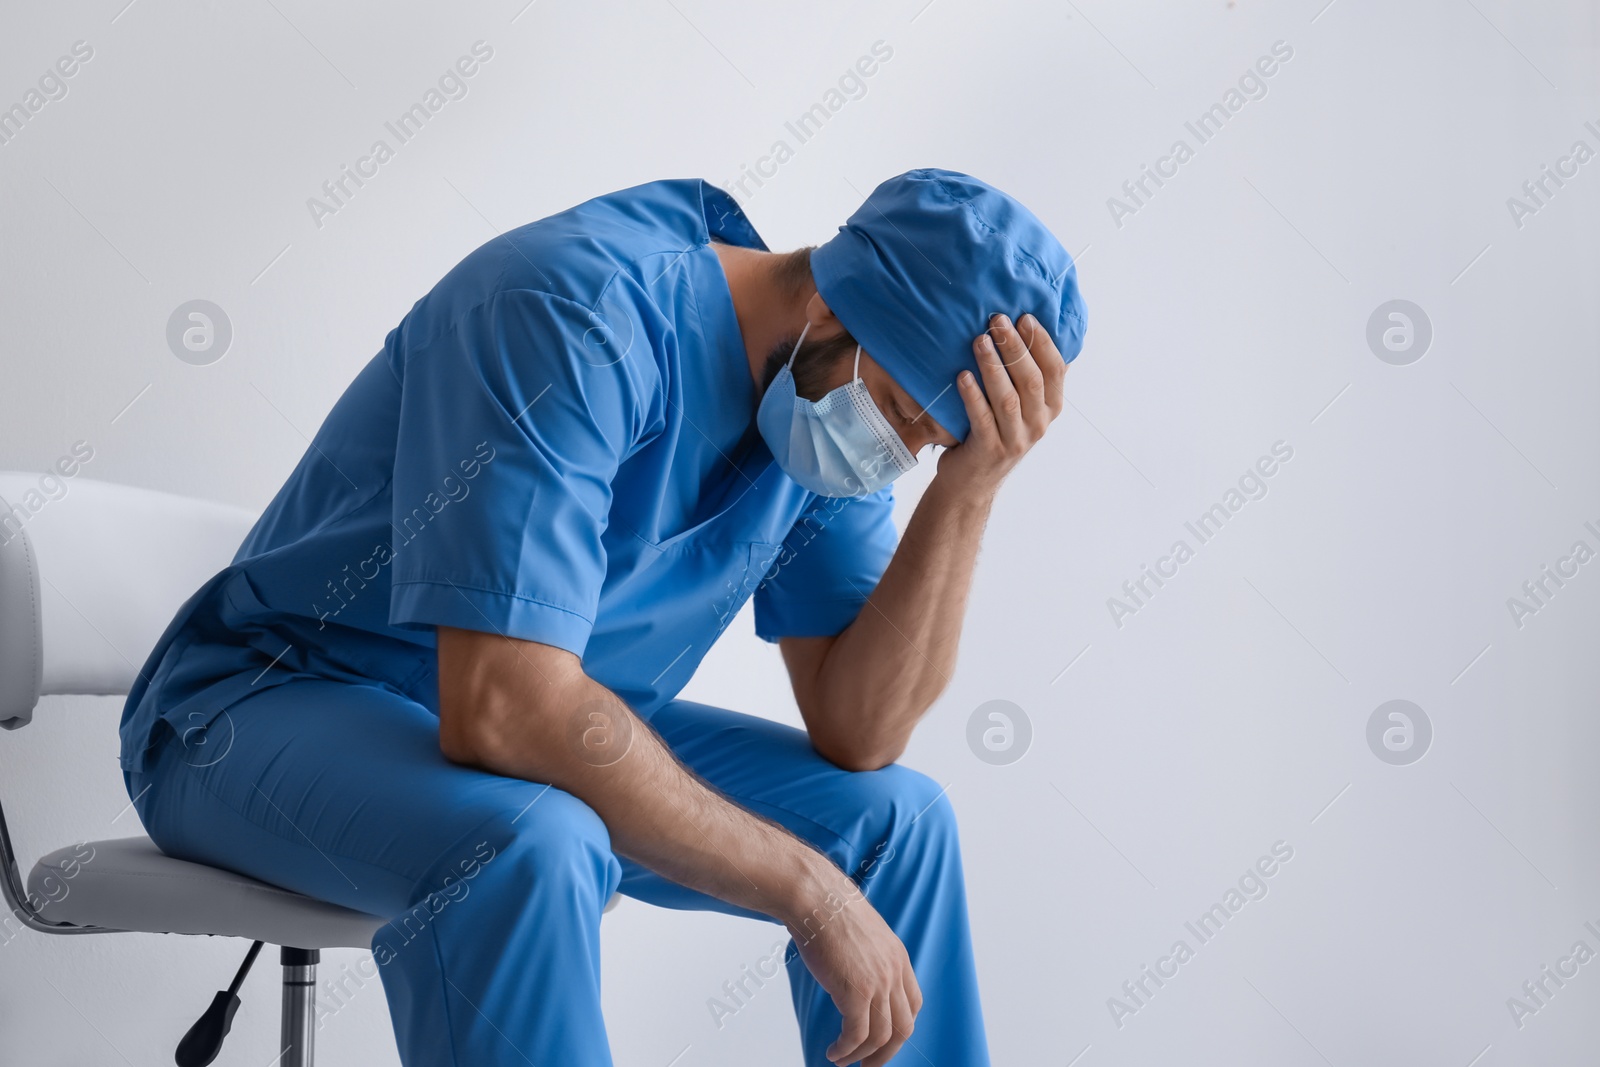 Photo of Exhausted doctor sitting on chair against light background. Stress of health care workers during COVID-19 pandemic